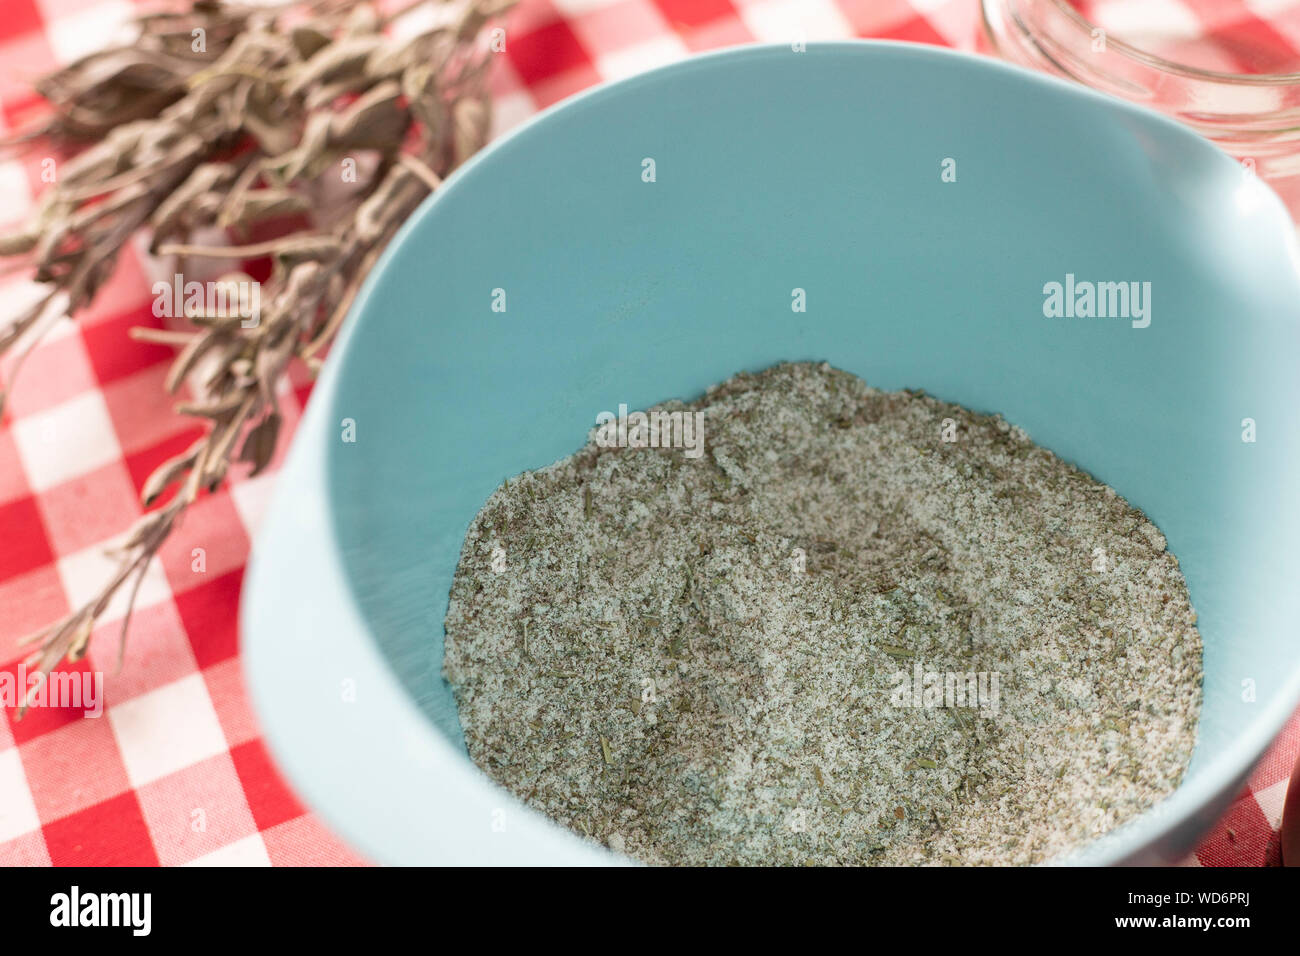 Blue bowl containing aromatics herbs - like dried sage and rosemary - mixed with sea salt using a blender, an homemade seasoning for everyday cooking. Stock Photo